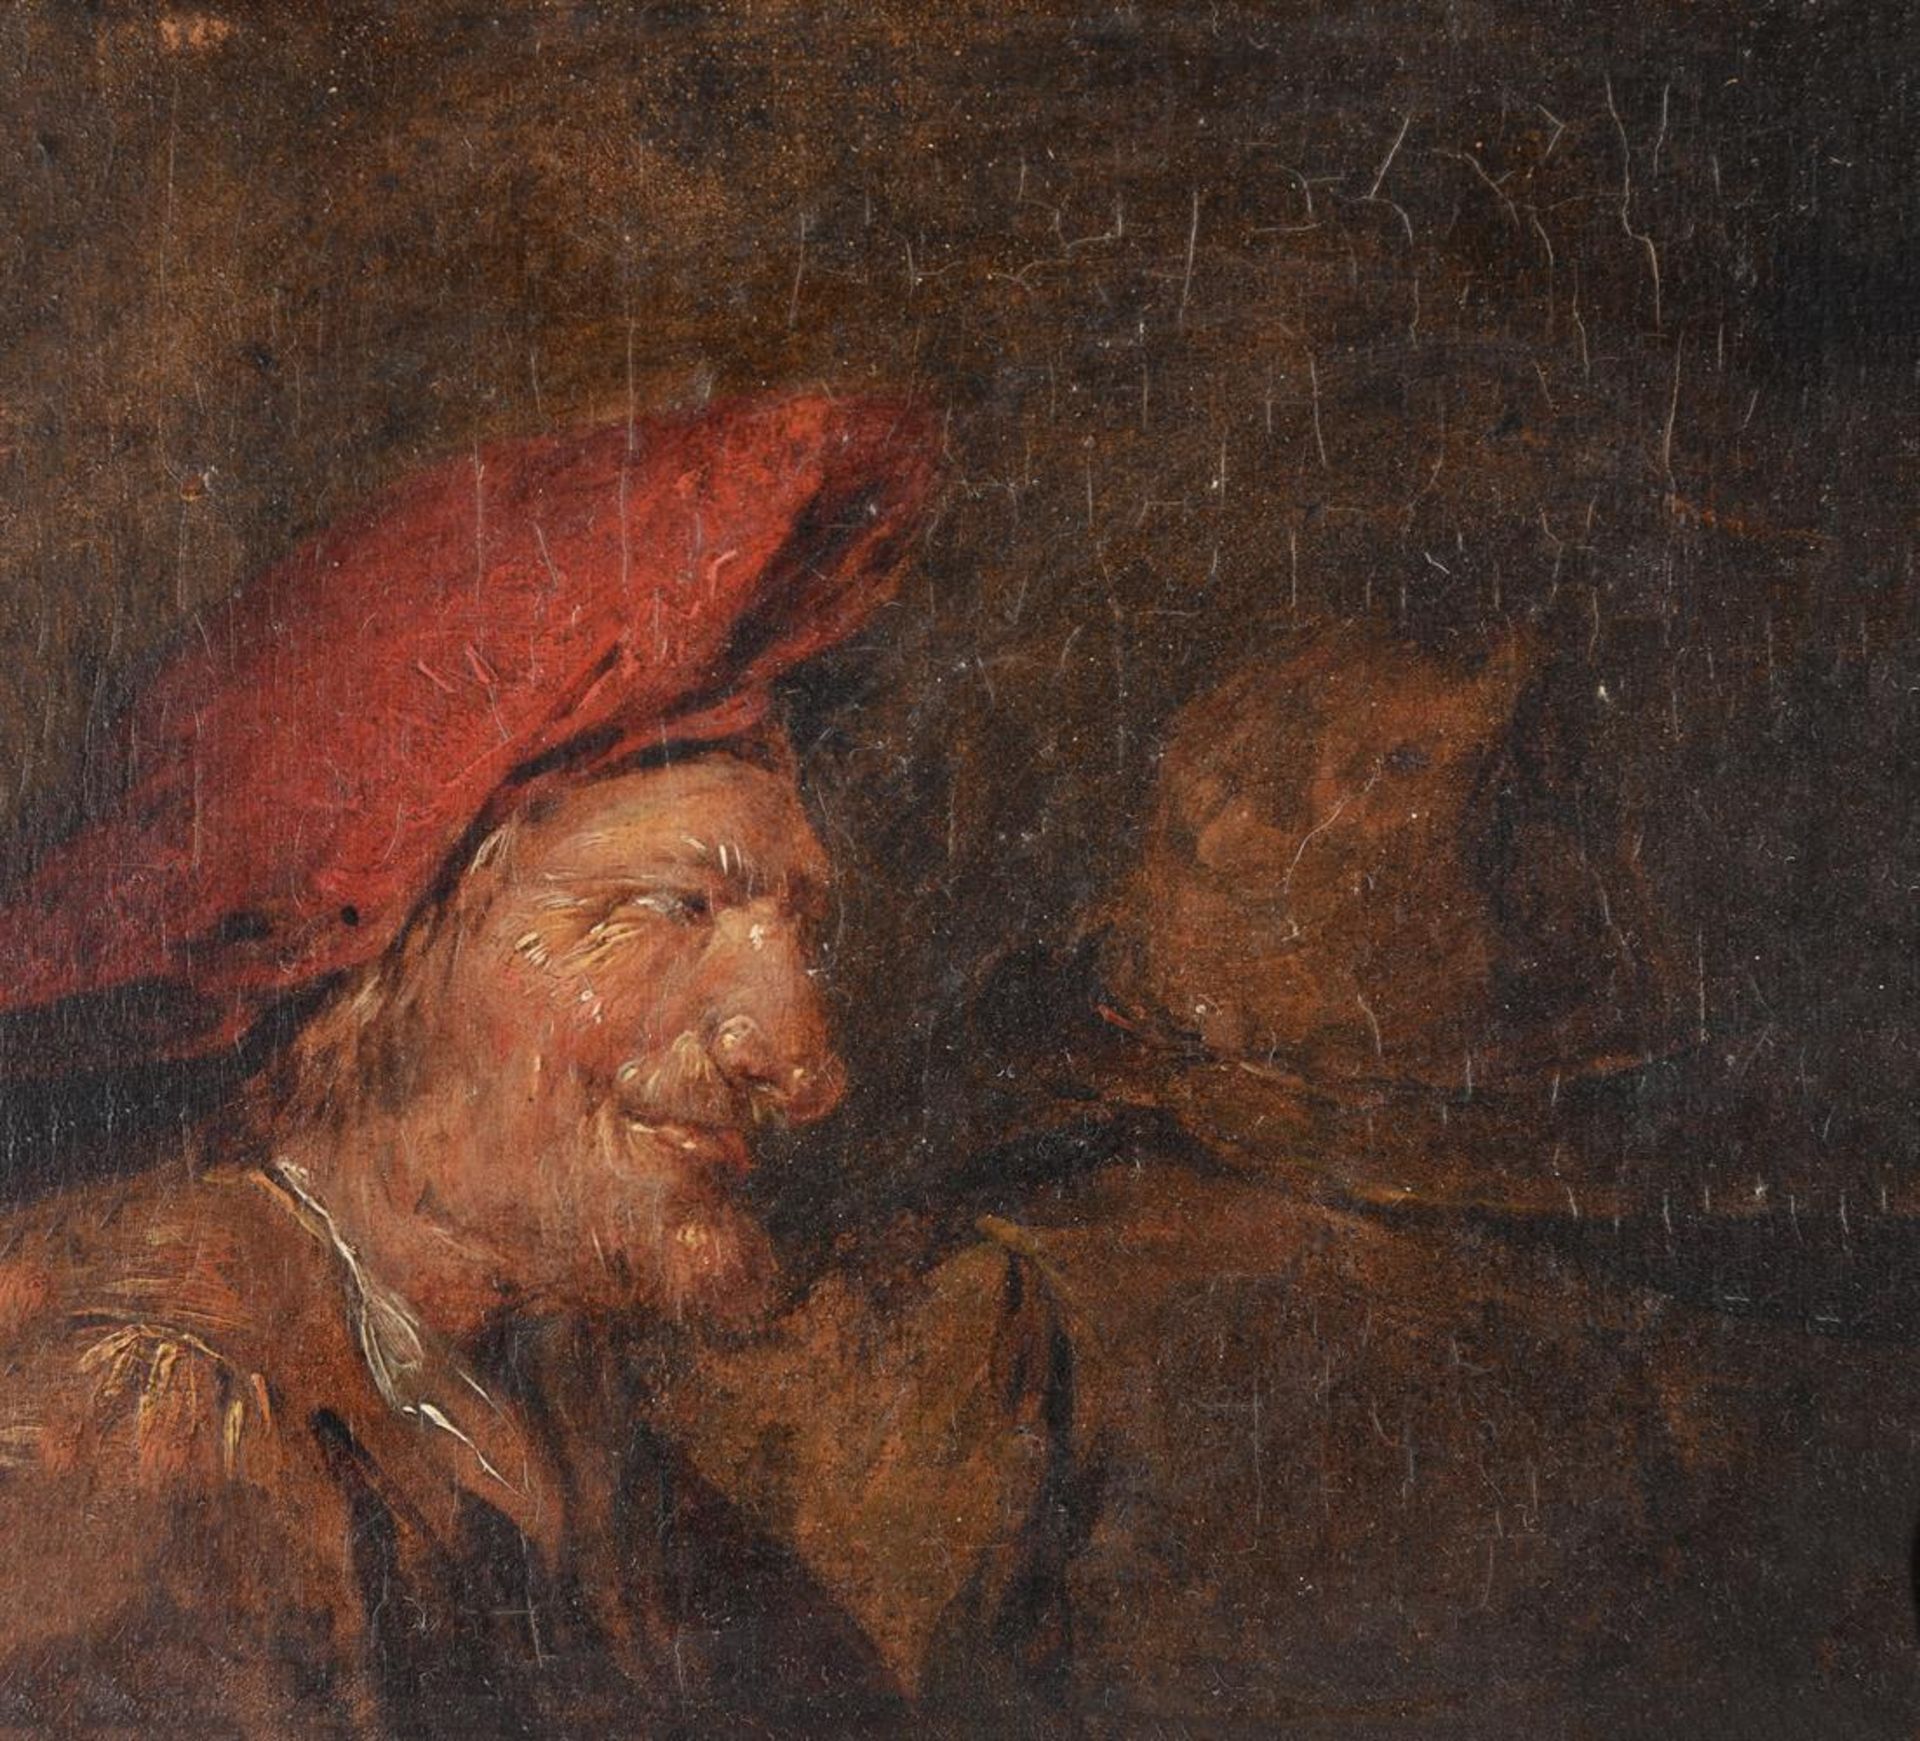 Continental School (c. 1700), Two heads, a study